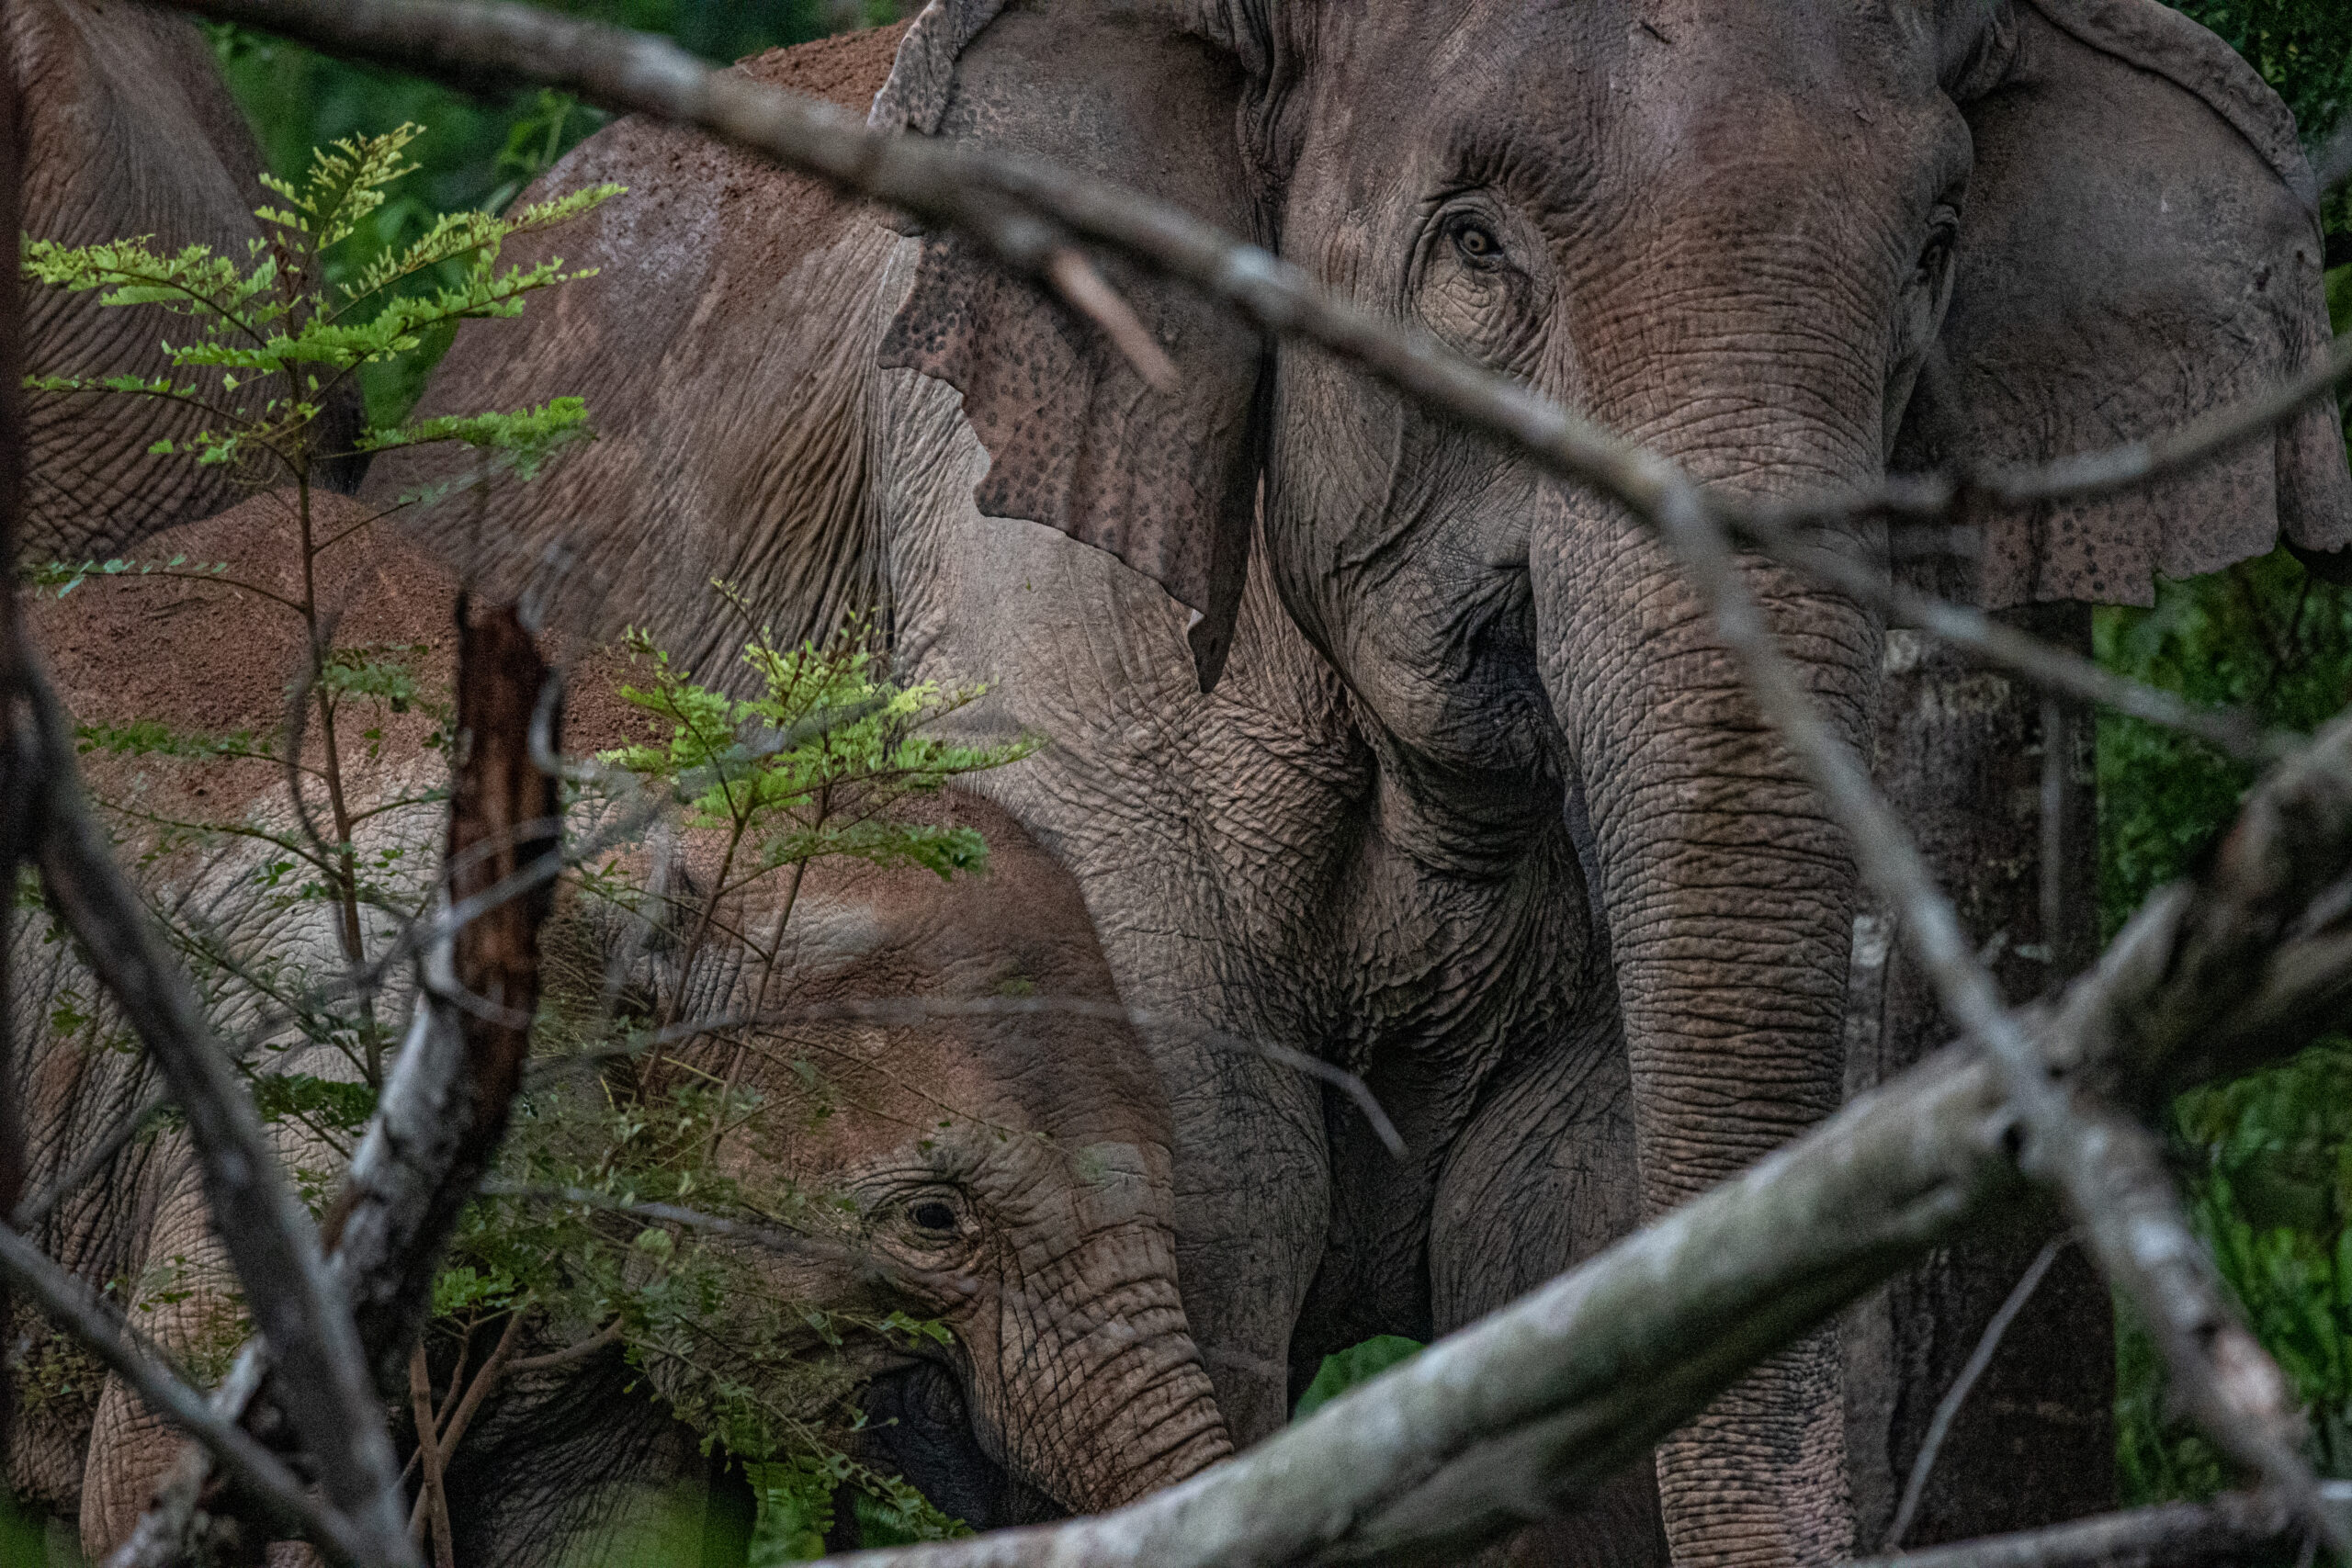 A Family Of Wild Asian Elephants Moves Through The Landscape At Dawn In Thailand's Kui Buri National Park. The Park Is Part Of Thailand's World Heritage Western Forest Complex (wefcom), One Of The Largest Networks Of Connected Protected Areas In Asia. Asian Elephants Are Endangered And Only Approximately 4,000 Remain In The Wild Throughout Their Range. Habitat Destruction And Fragmentation, Wild Capture For The Tourist Industry, And Poaching For Ivory Have Contributed To The Rapid Decline Of Wild Populations Over The Past 100 Years.